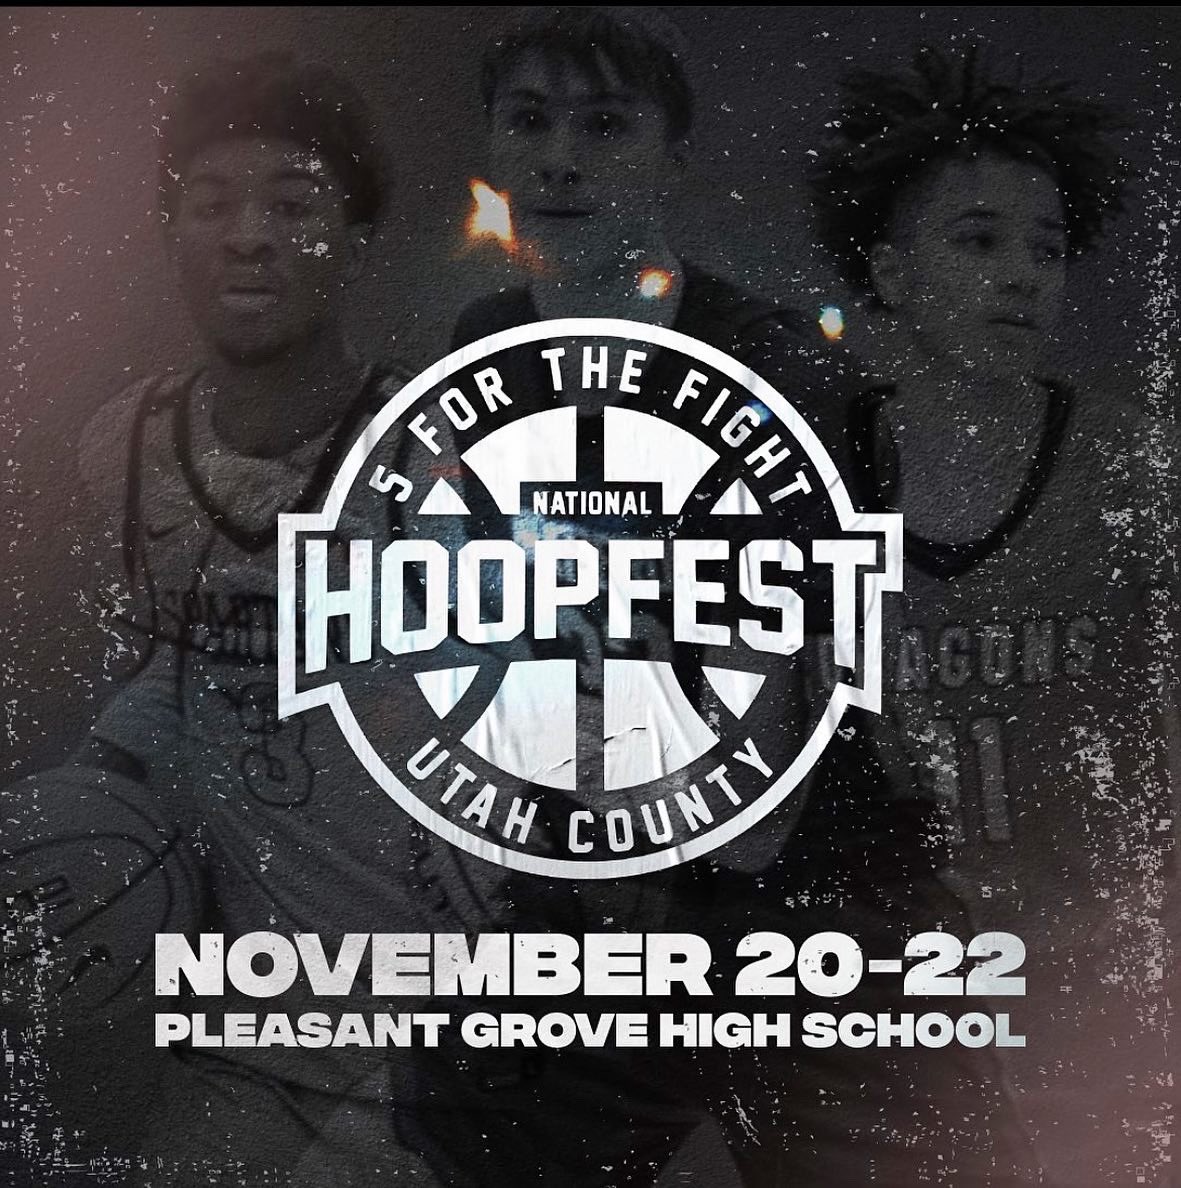 Excited to kick off our 2023-24 HS hoop season at the @5forthefight Hoopfest🏀📊Proud to be the official stats & analytics service for @HoopfestUSA‼️ • This year’s event features the defending national champs, @LinkHoops and ESPN #1 team in the nation, @MVABasketball🇺🇸